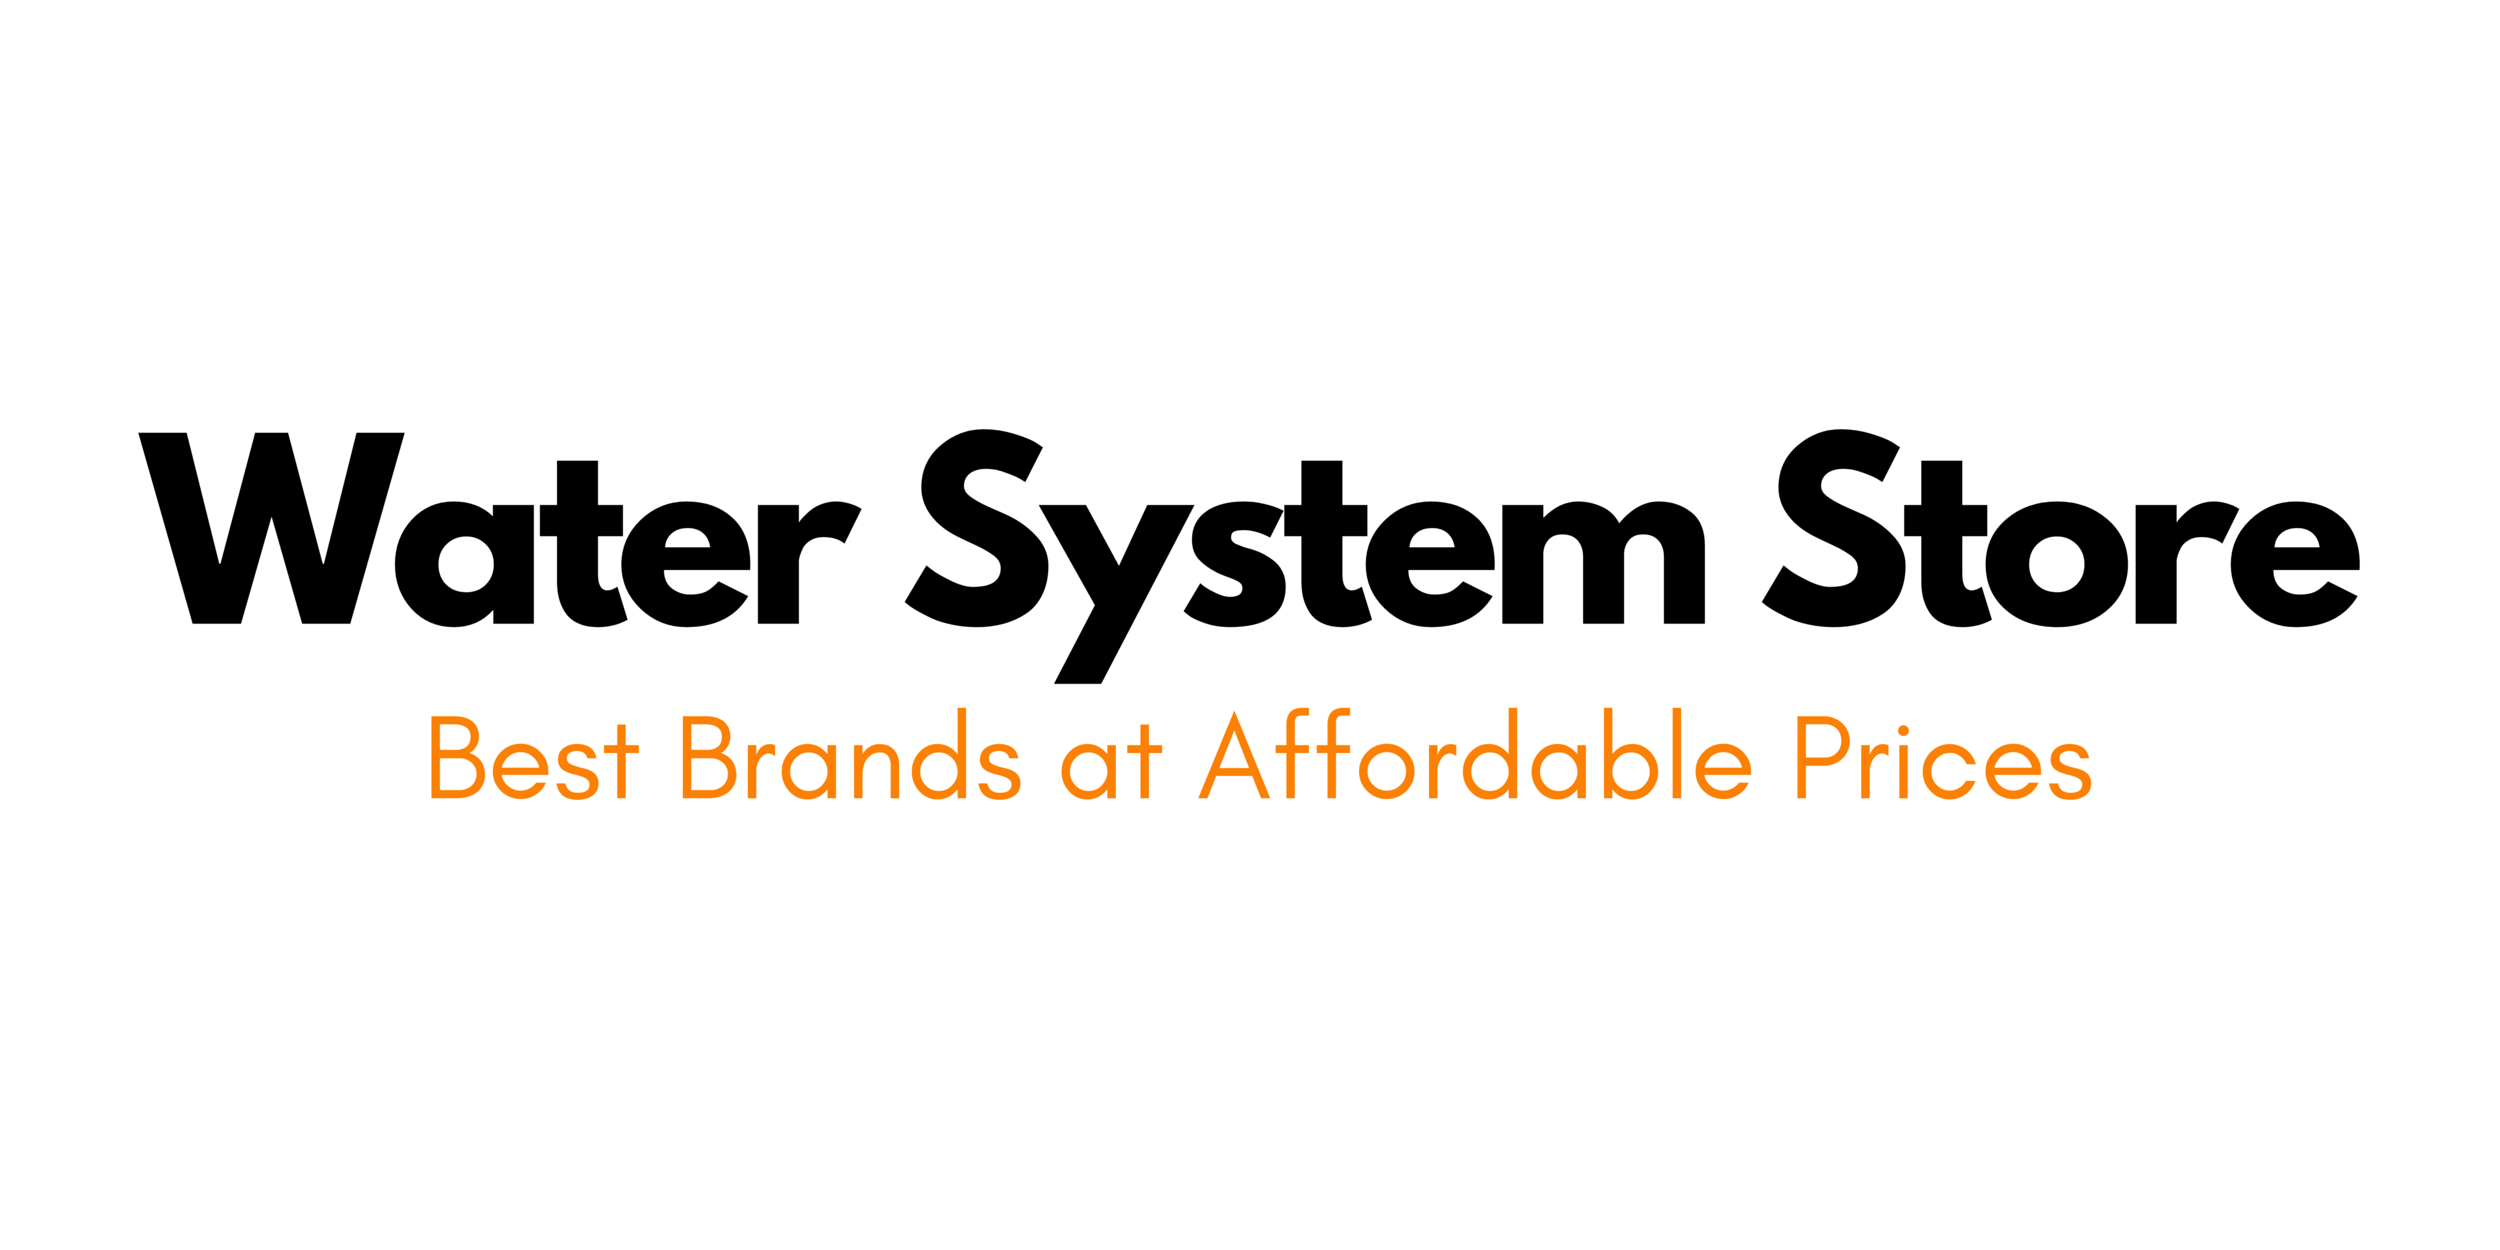 Water System Store - Best Brands At Affordable Prices